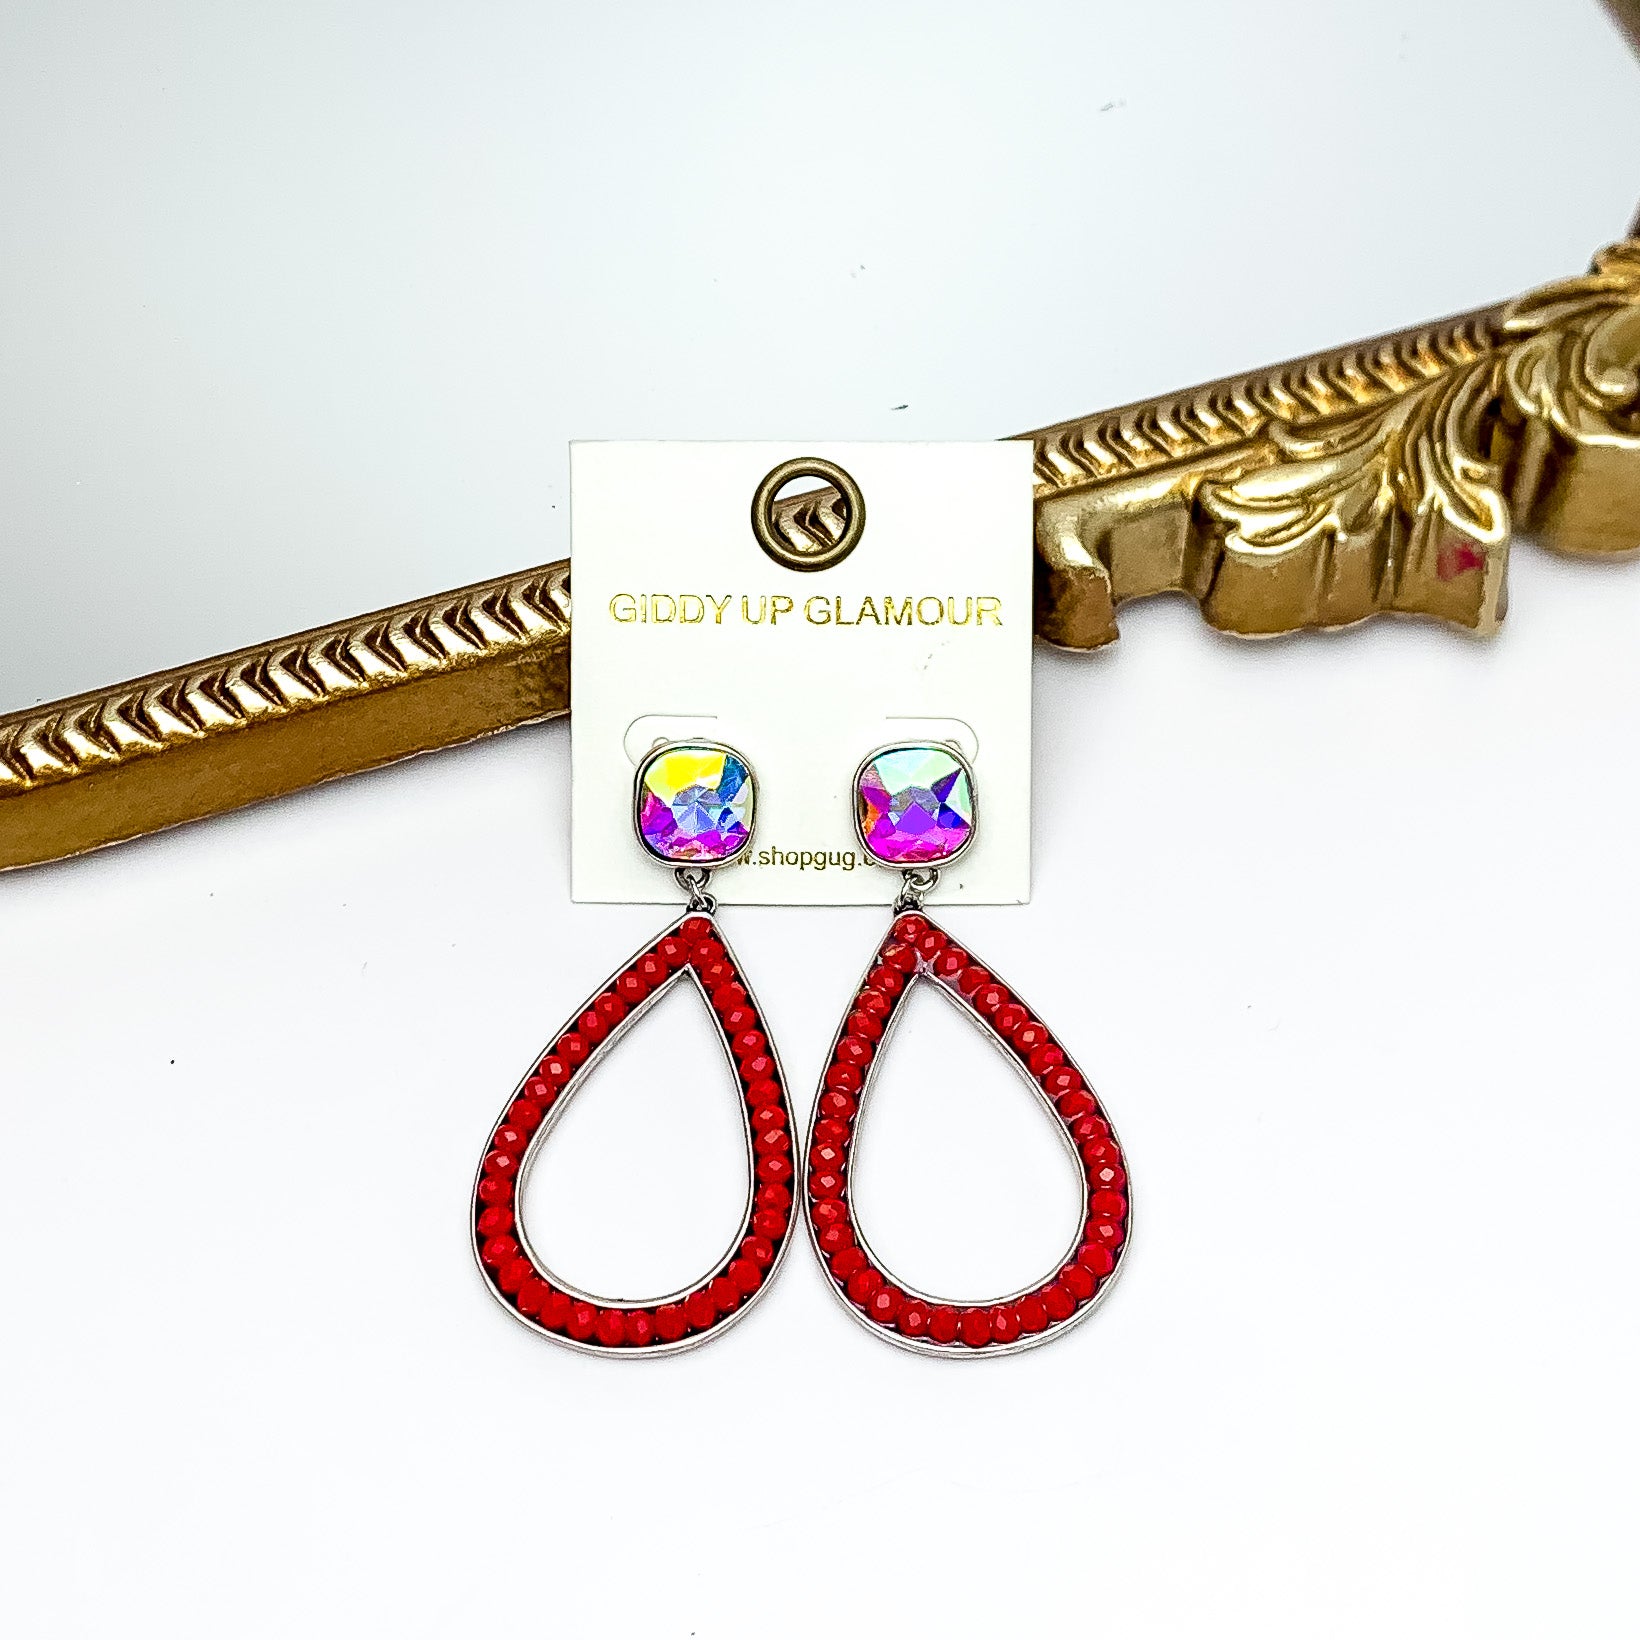 Glass Beaded Teardrop Post Earrings with AB Crystal in Red. Pictured on a white background with a gold frame behind the earrings.